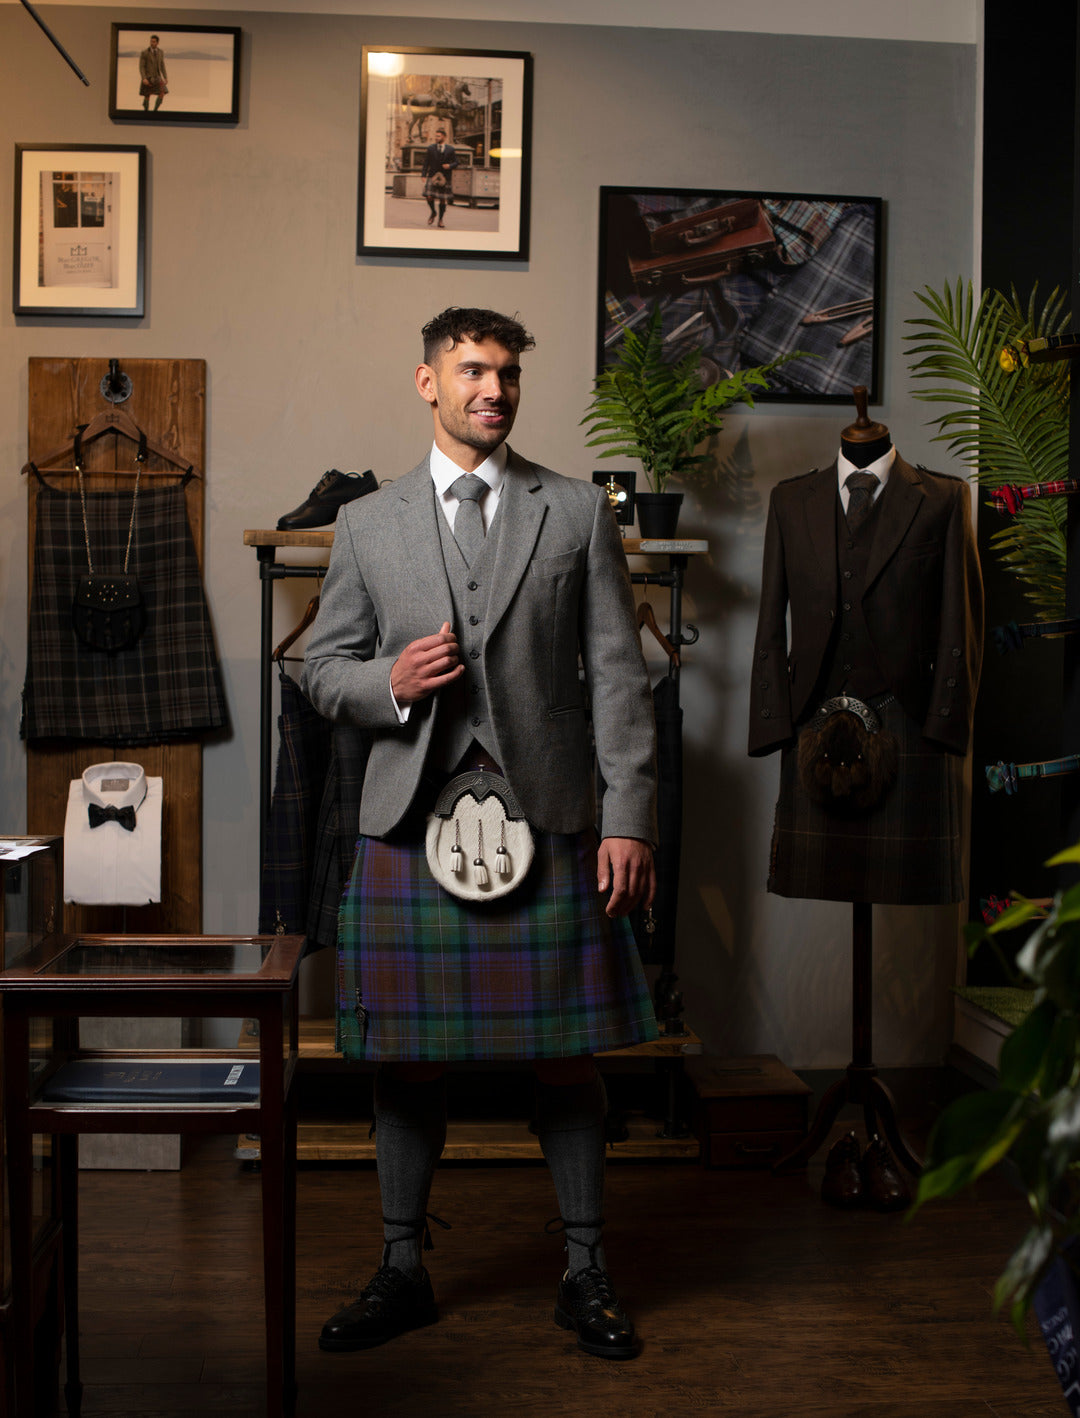 Kilt outfit for hire